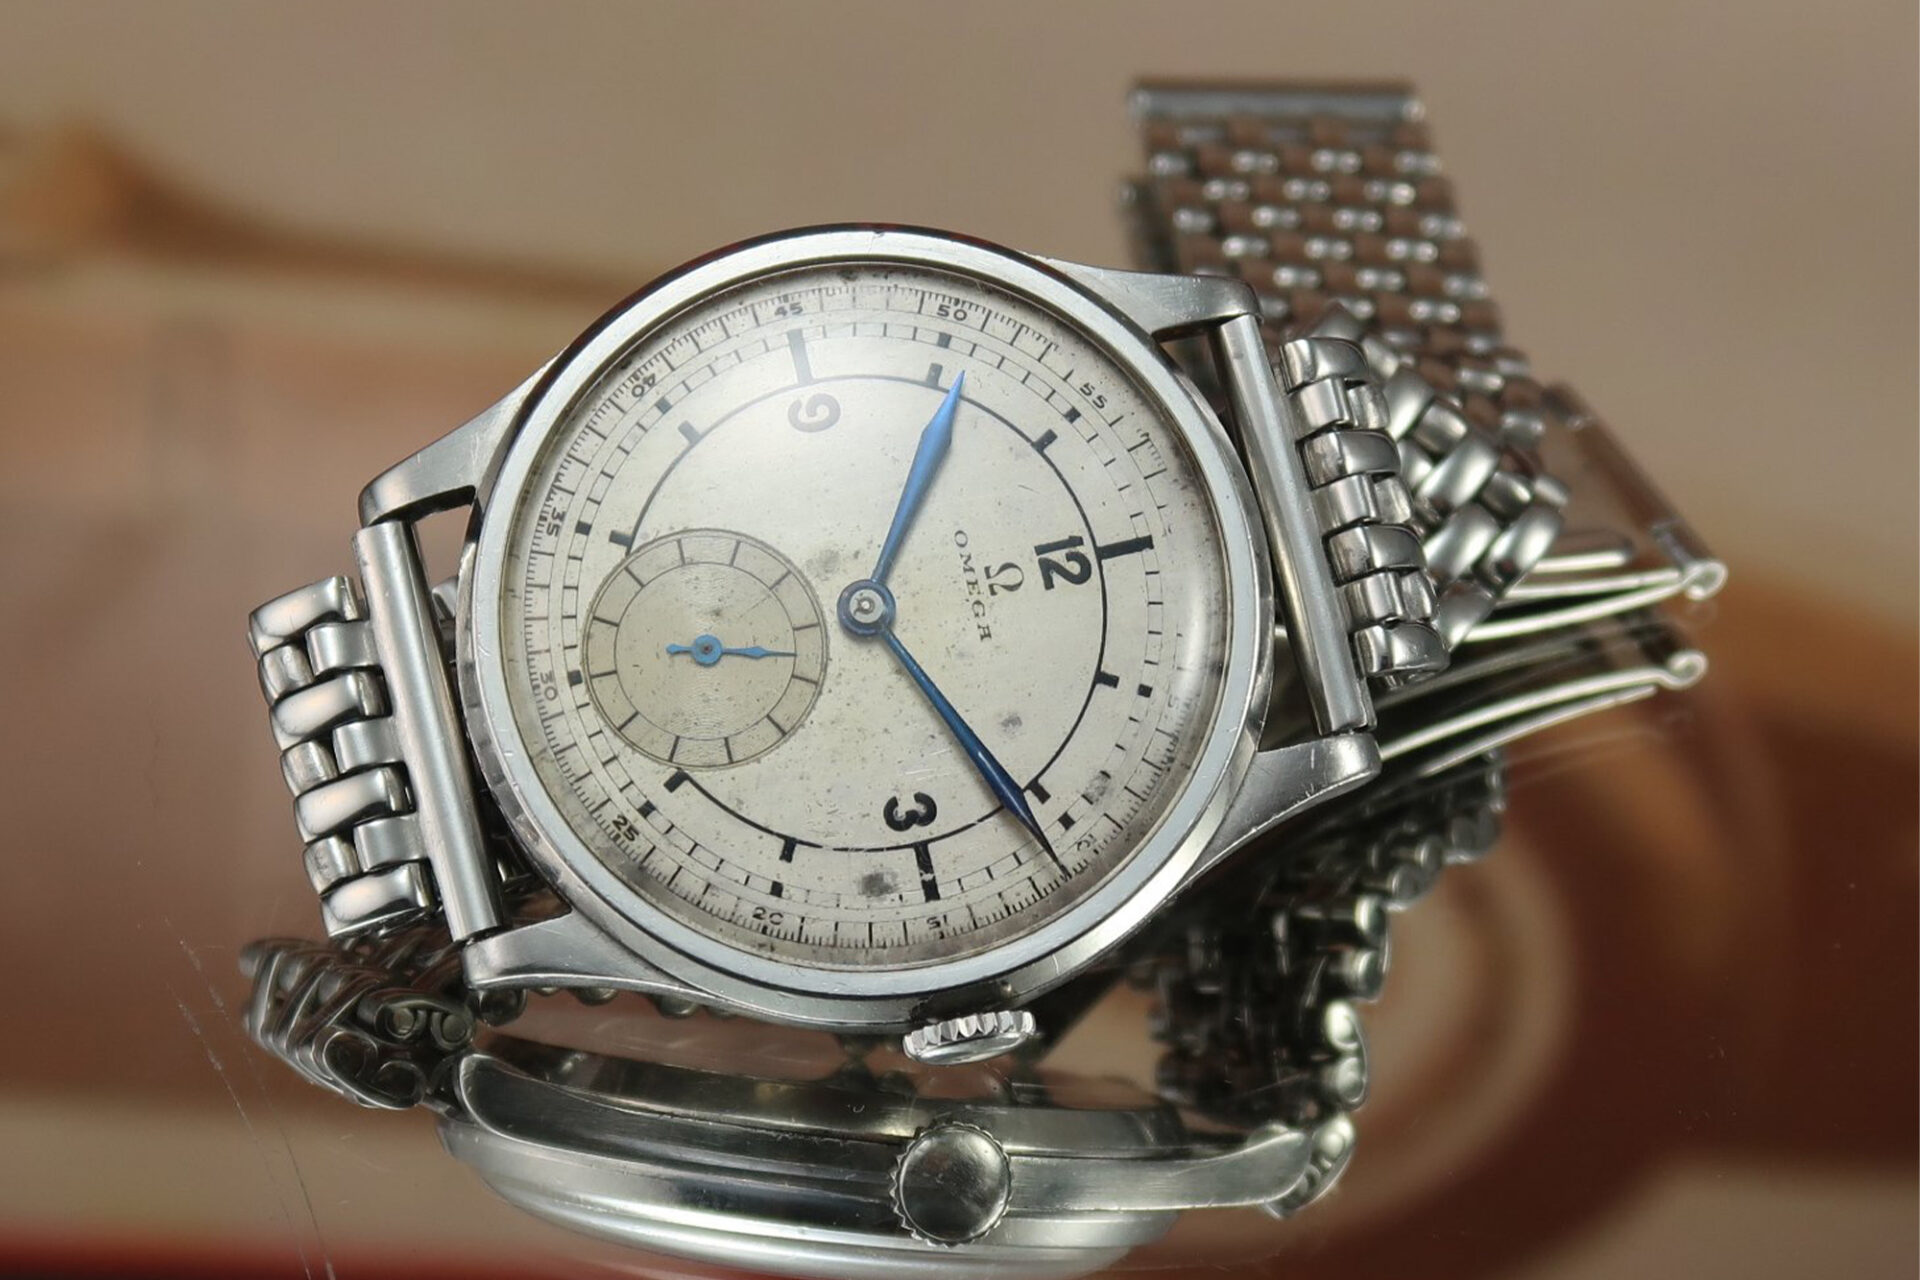 Omega CK 859 - Crédits : Cars and Watches